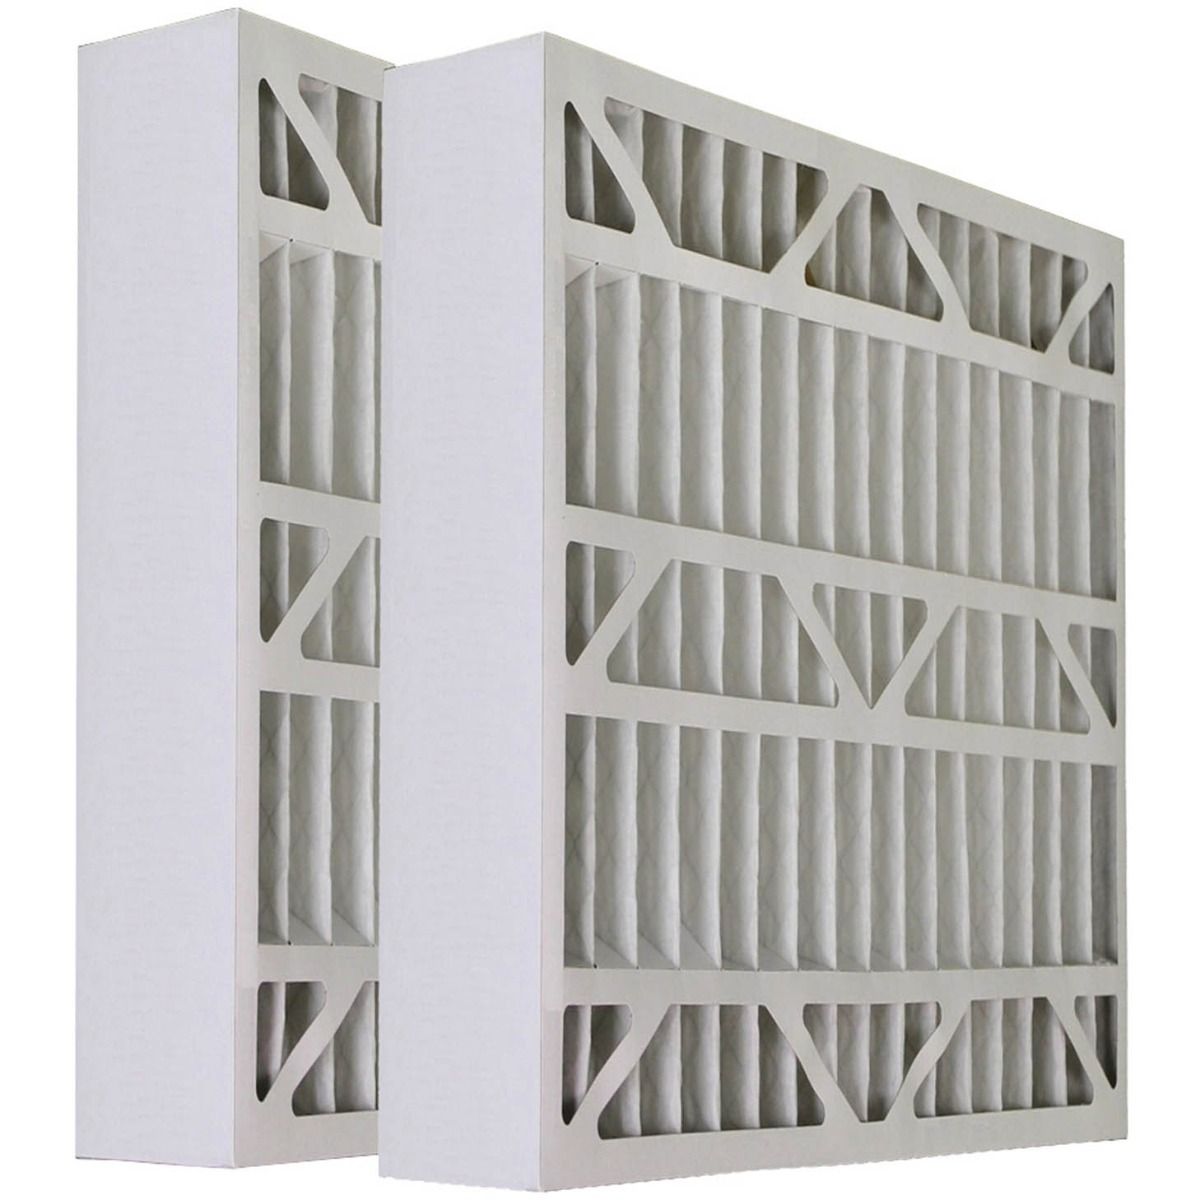 Tier1 20x25x6 Merv 8 Pleated AC Furnace Air Filter 2 Pack (Actual Size: 19 3/4 x 24 1/4 x 6)